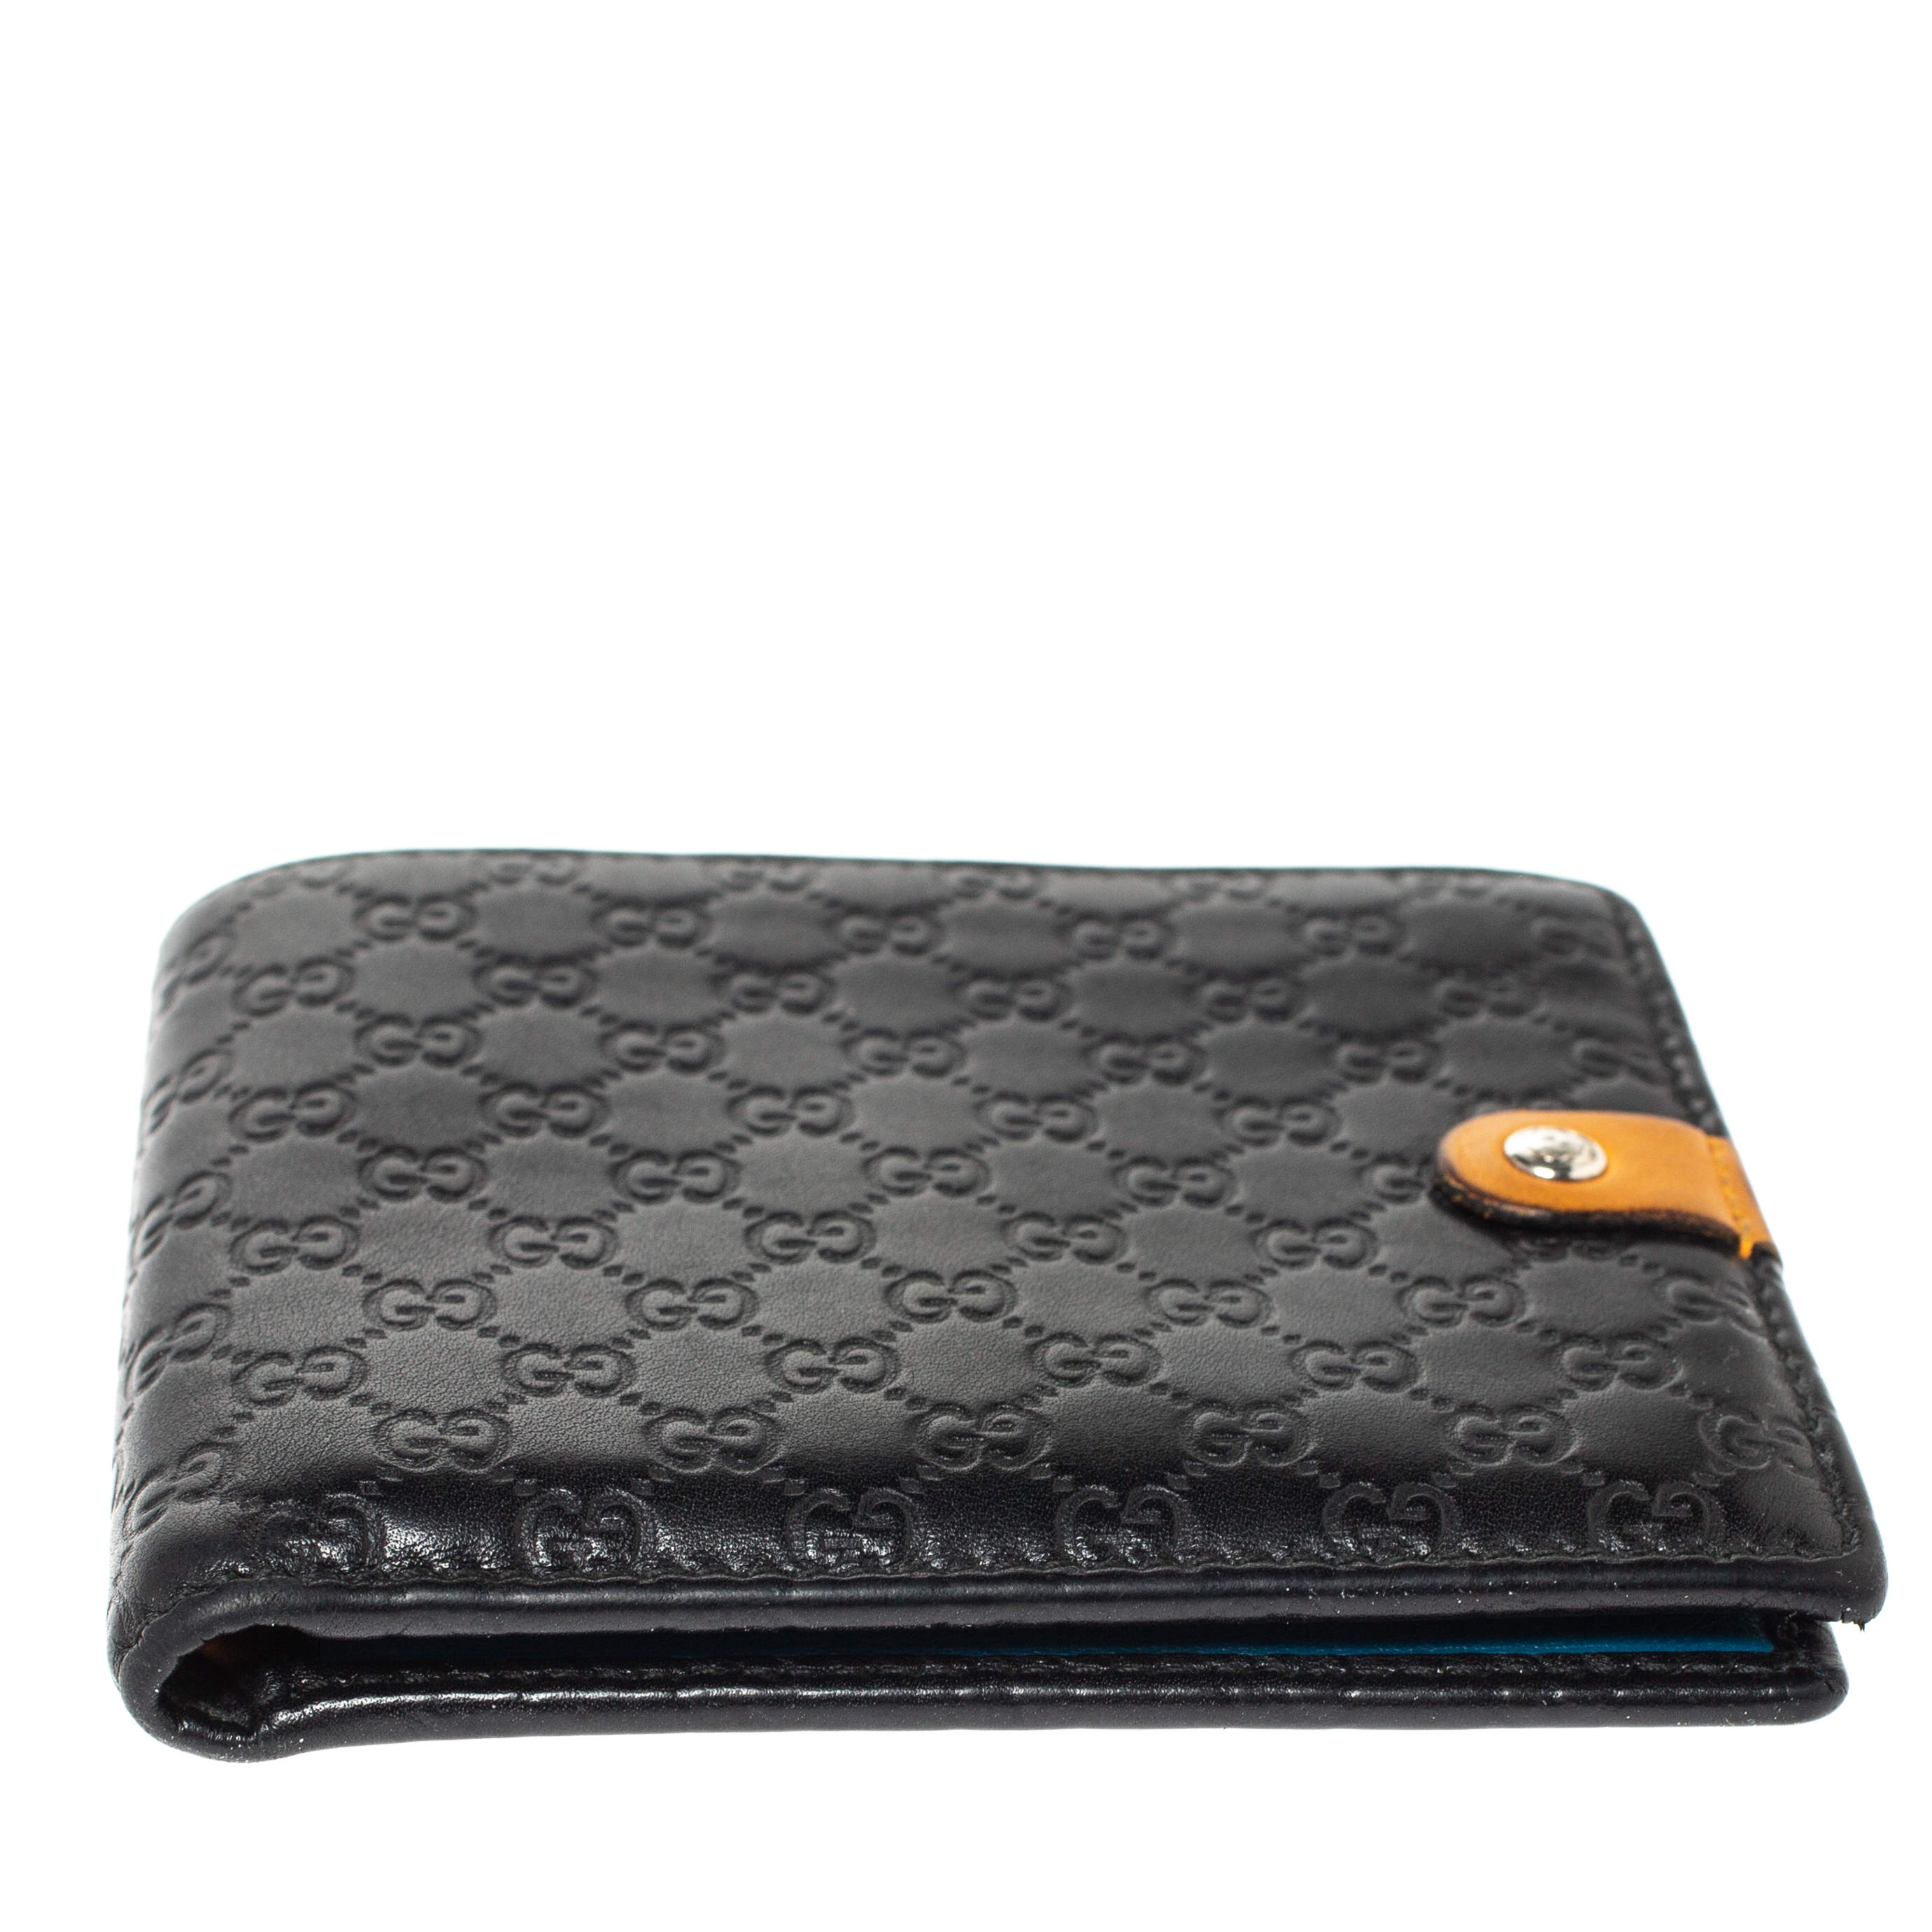 Gucci Men's Microguccissima GG Black Leather Bifold Wallet – Queen